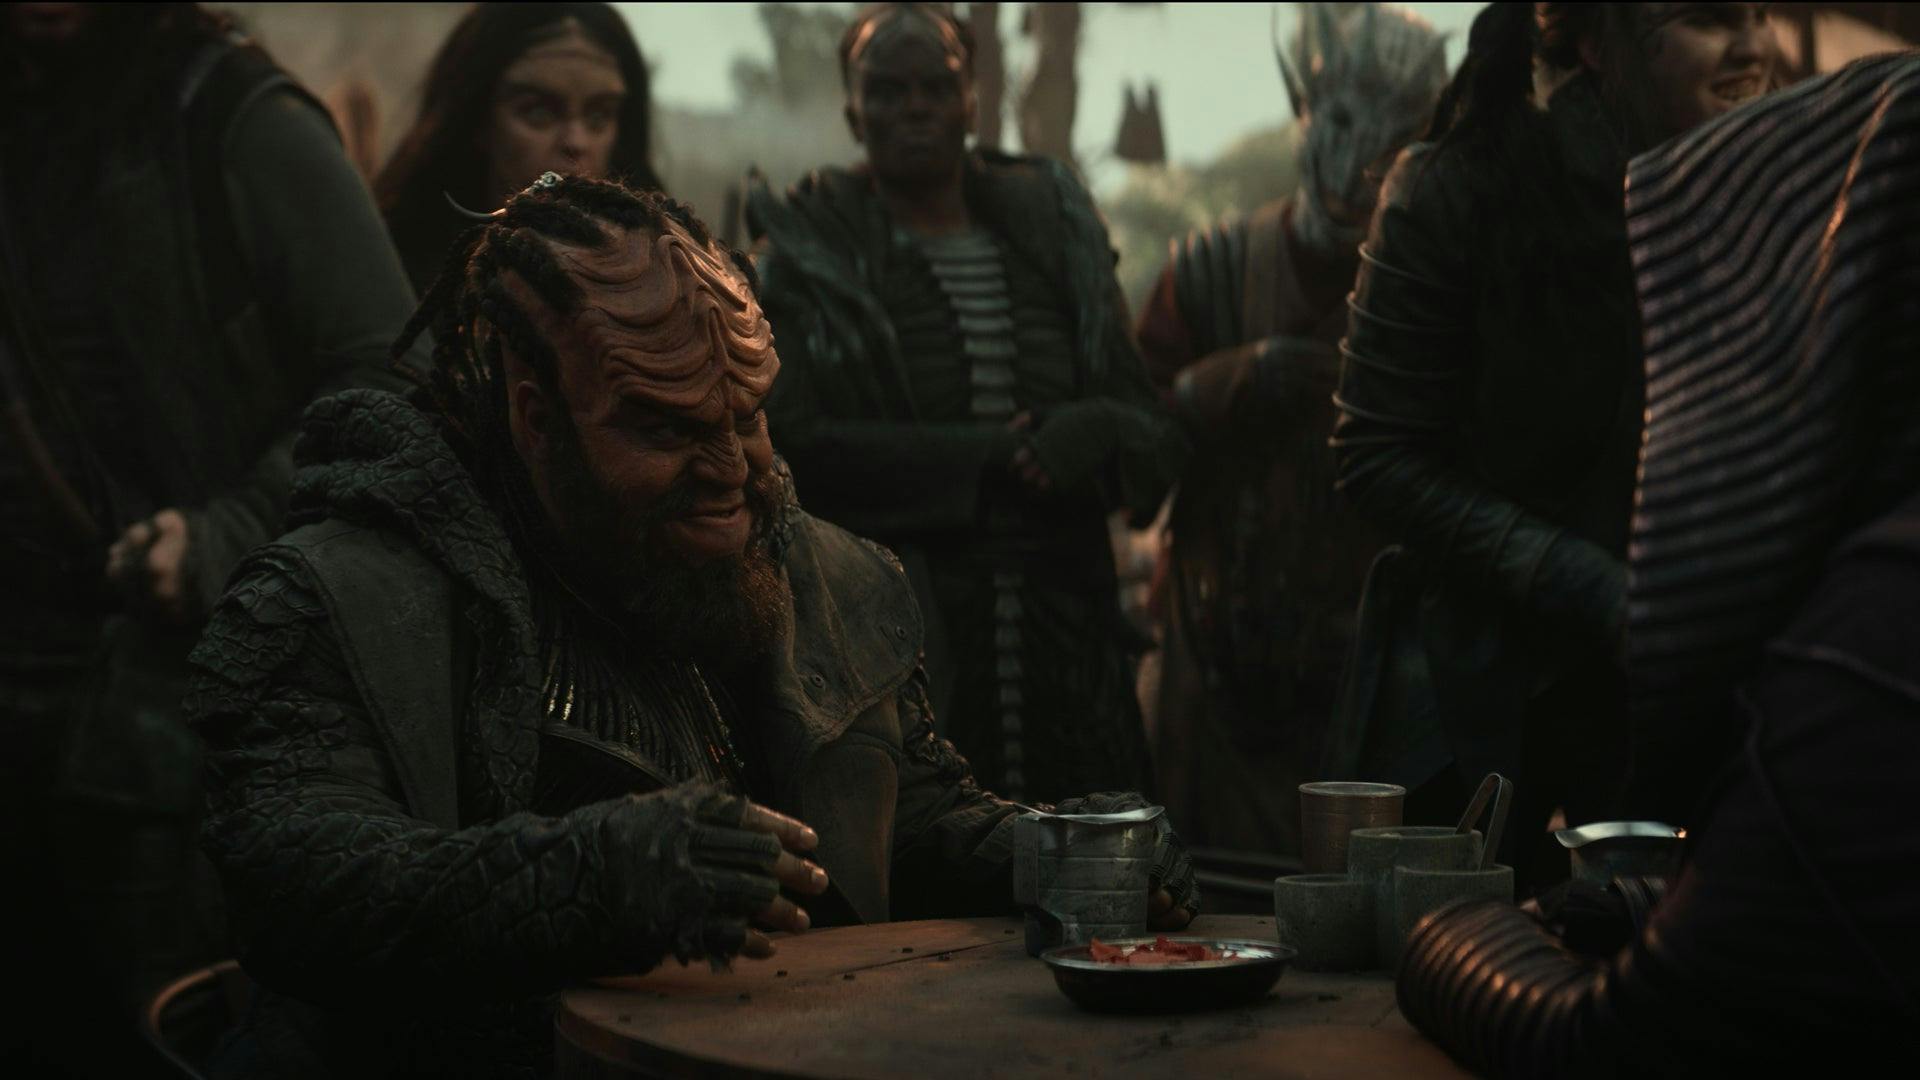 Klingon Kr'Dogh and La'An try to drink each other under the table with bloodwine in 'The Broken Circle'